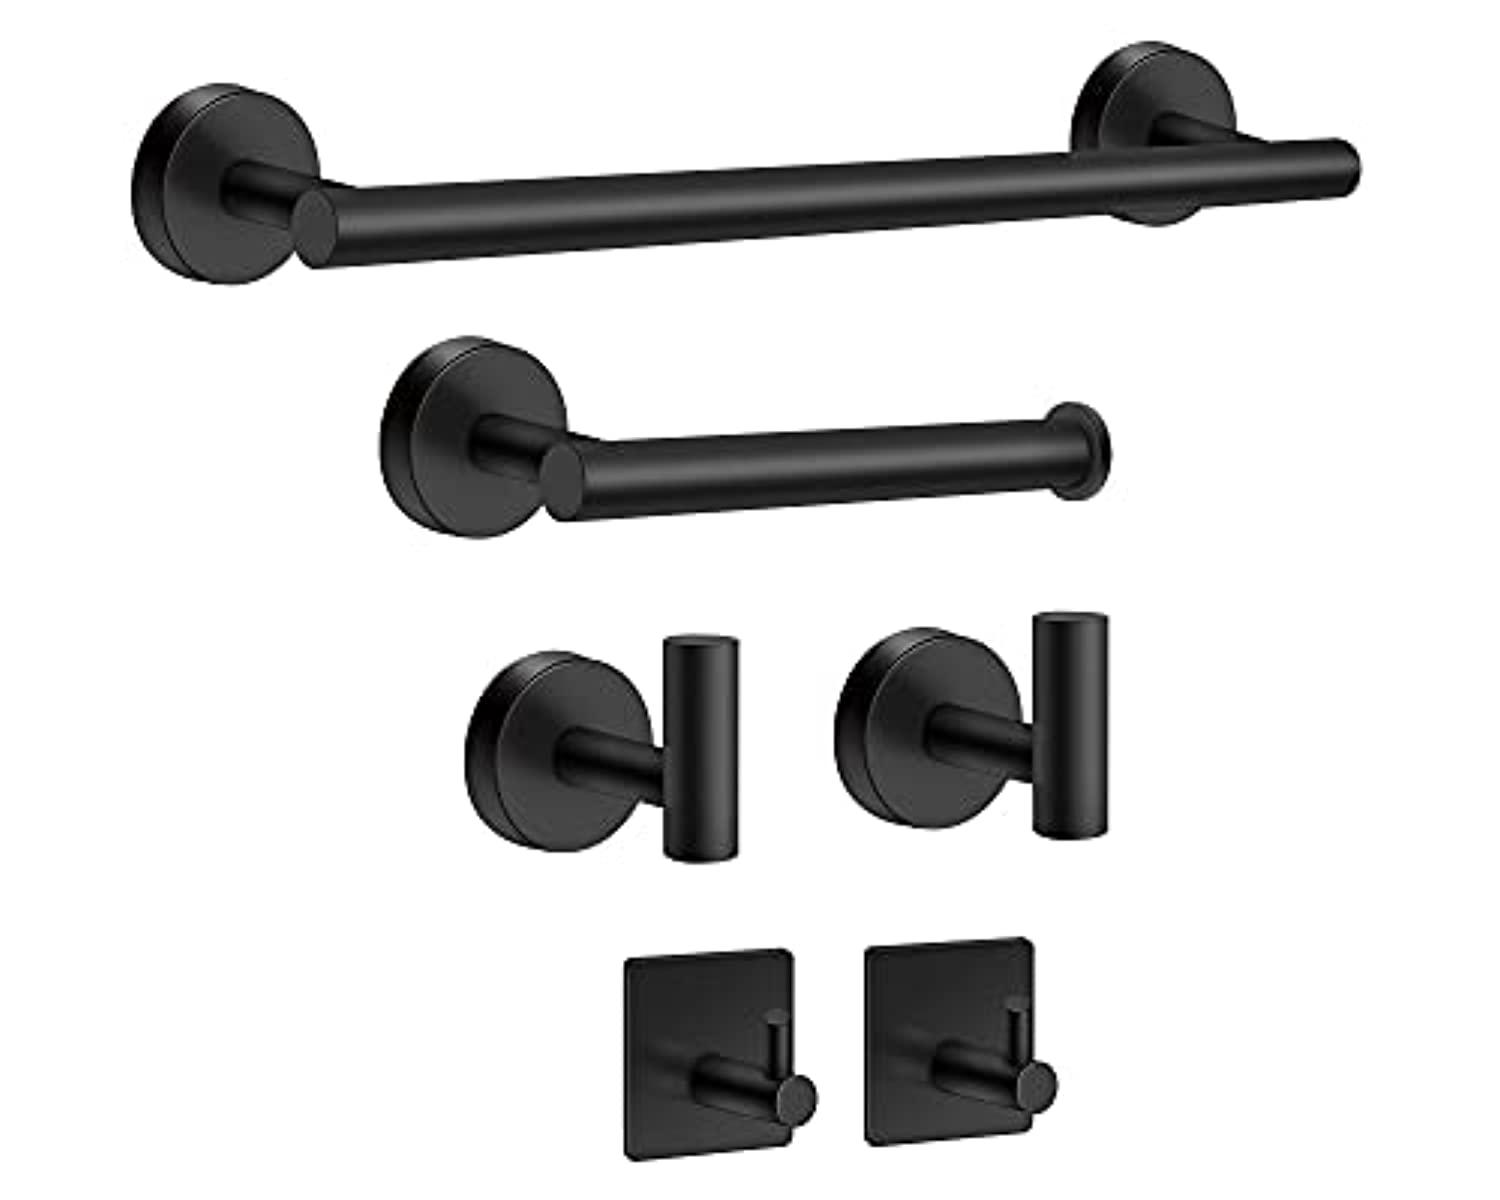 mengxfly 6-piece matte black bathroom hardware set 304 stainless steel round wall mounted bath accessories kit - 16 in towel bar + toi